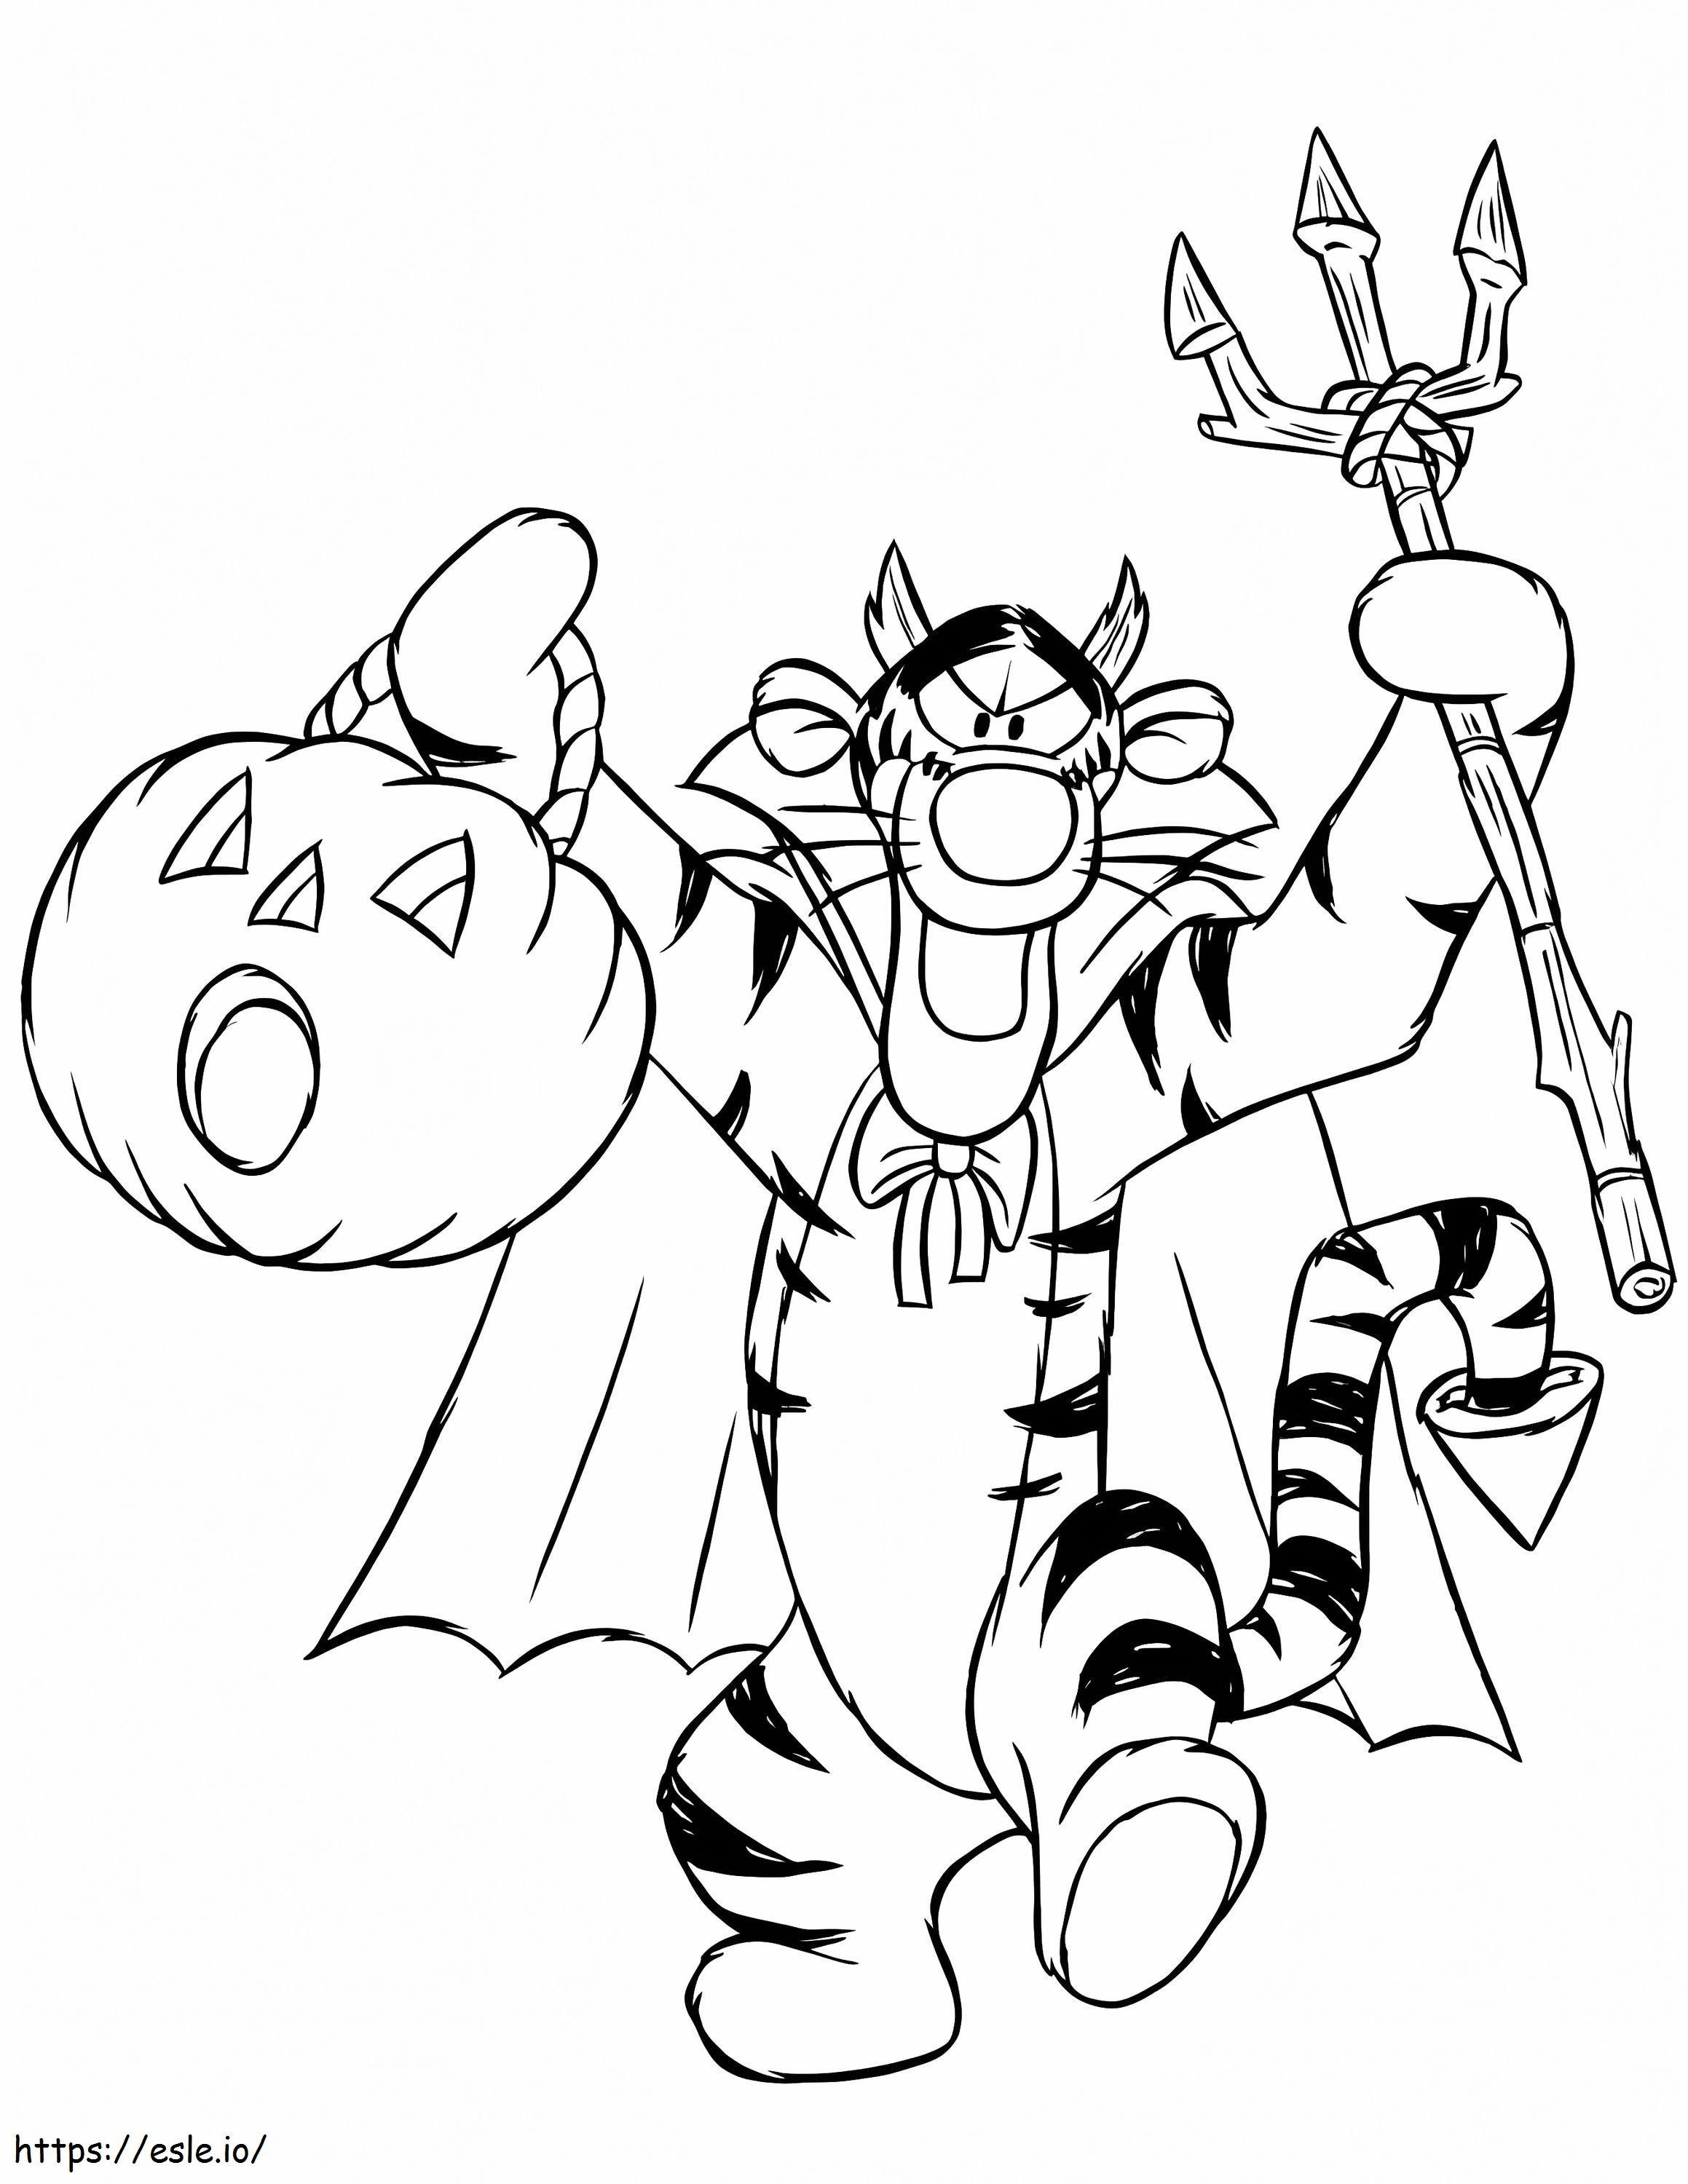 Tigger On Halloween coloring page